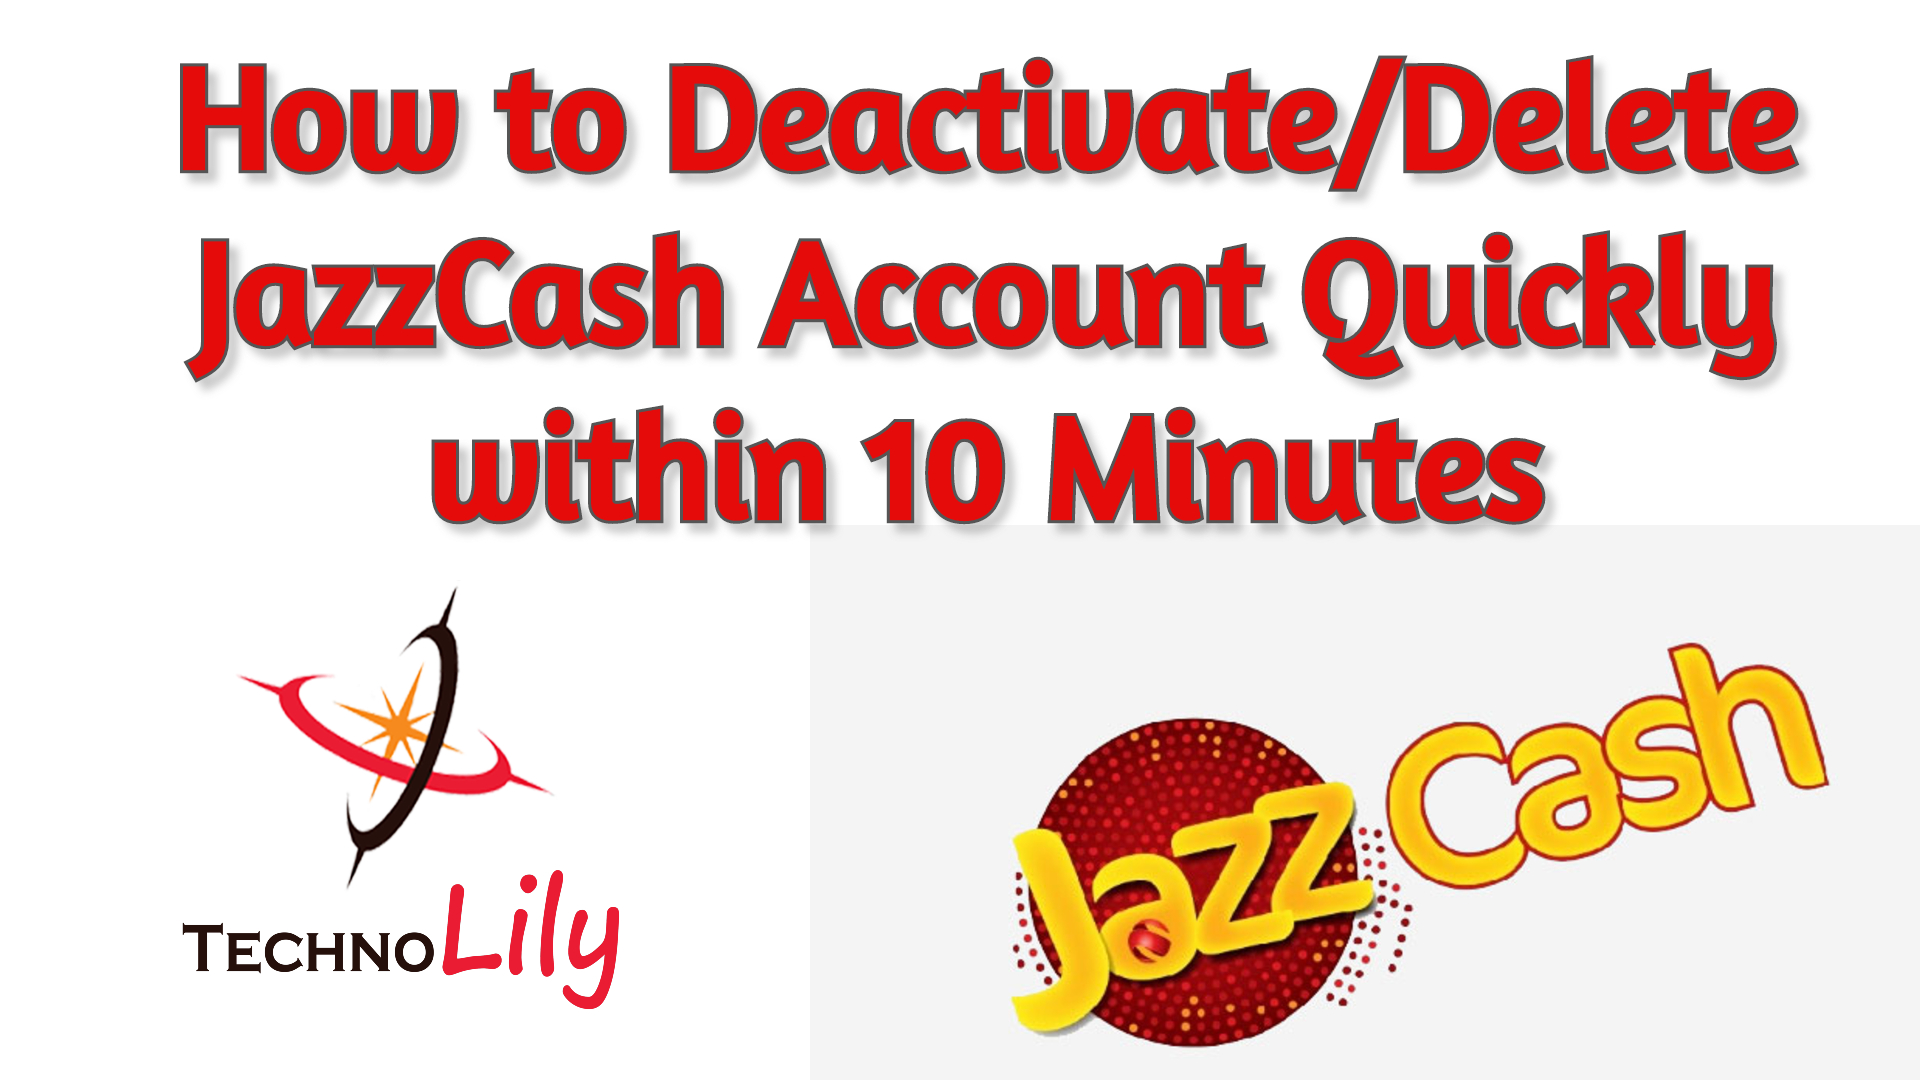 How to Deactivate/Delete JazzCash Account Quickly within 10 Minutes